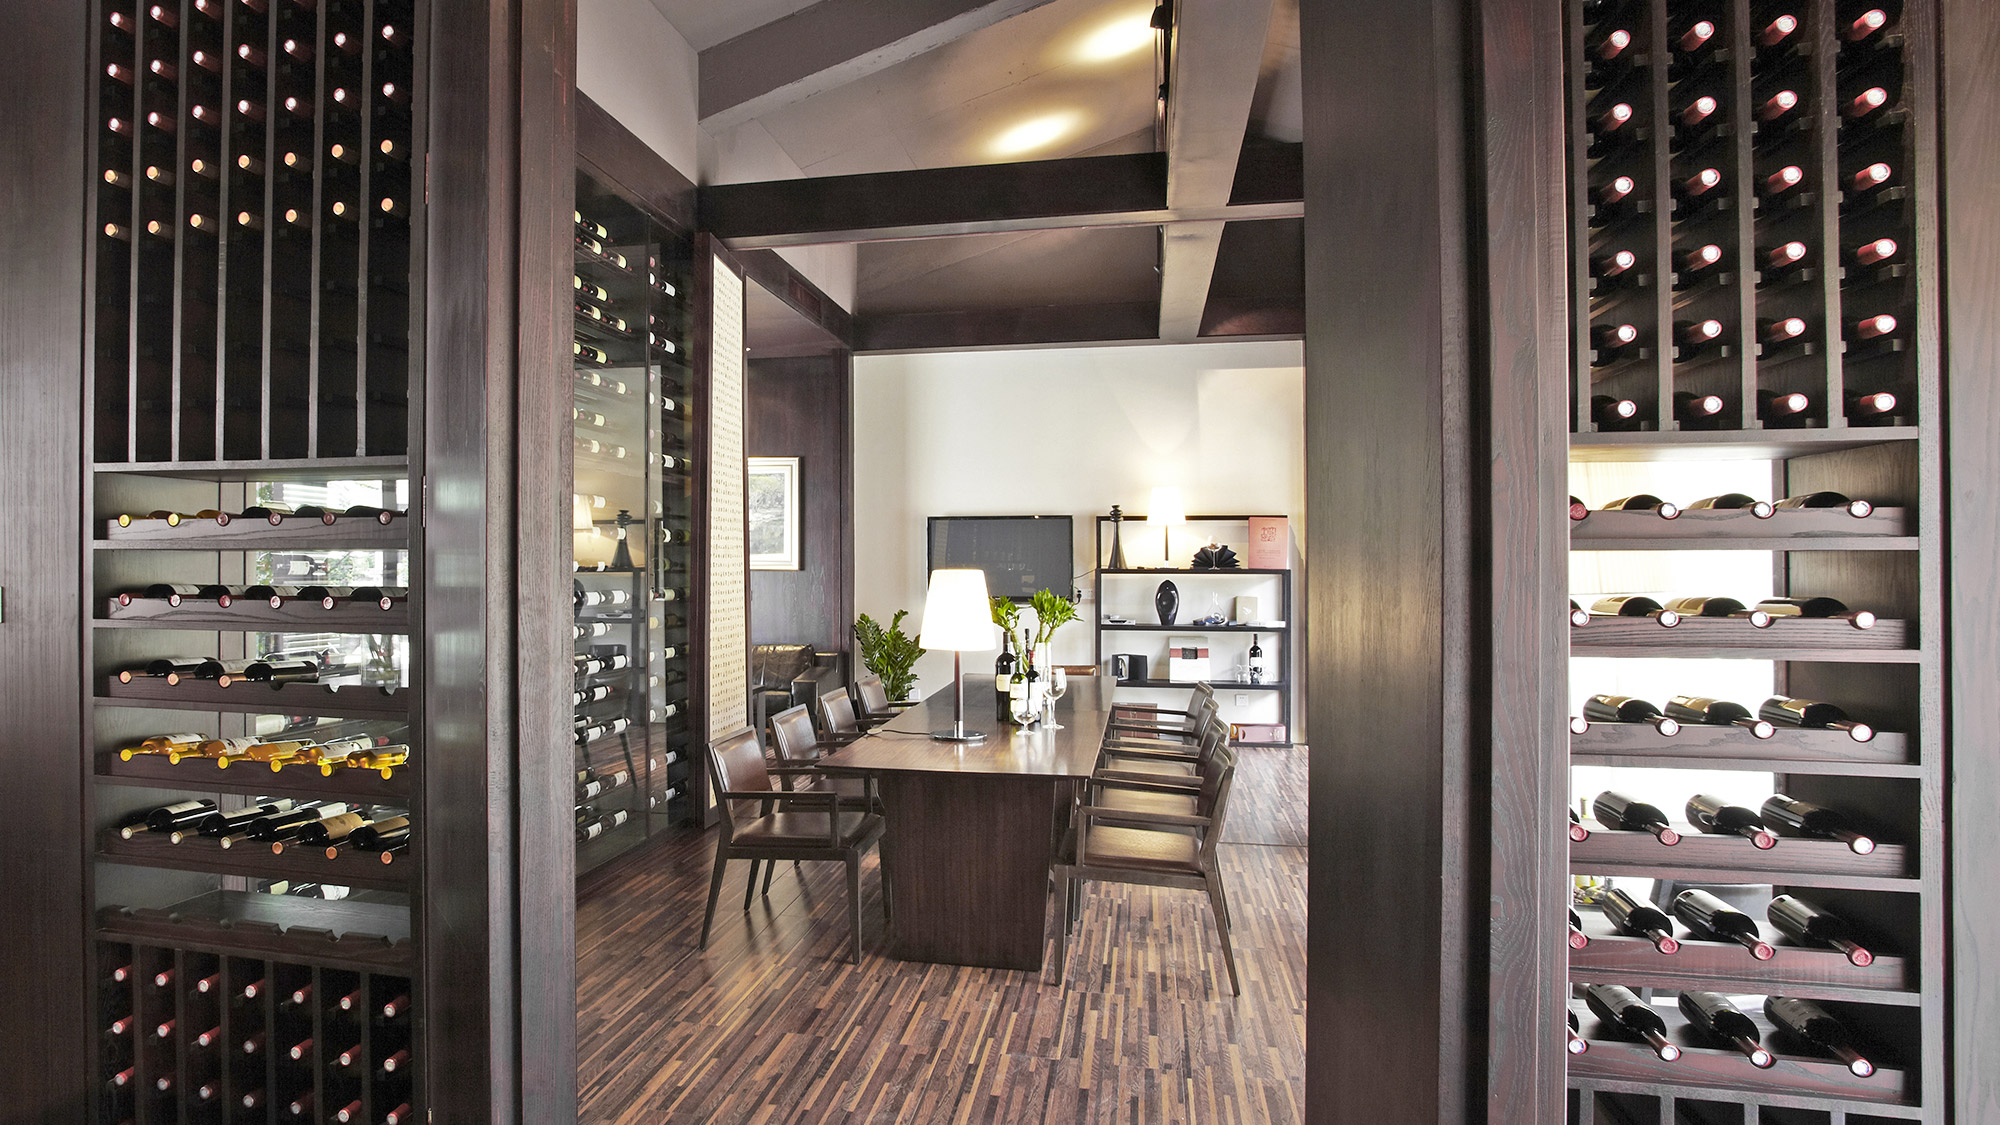 Wine cellar as a function of the dining room in a luxury home